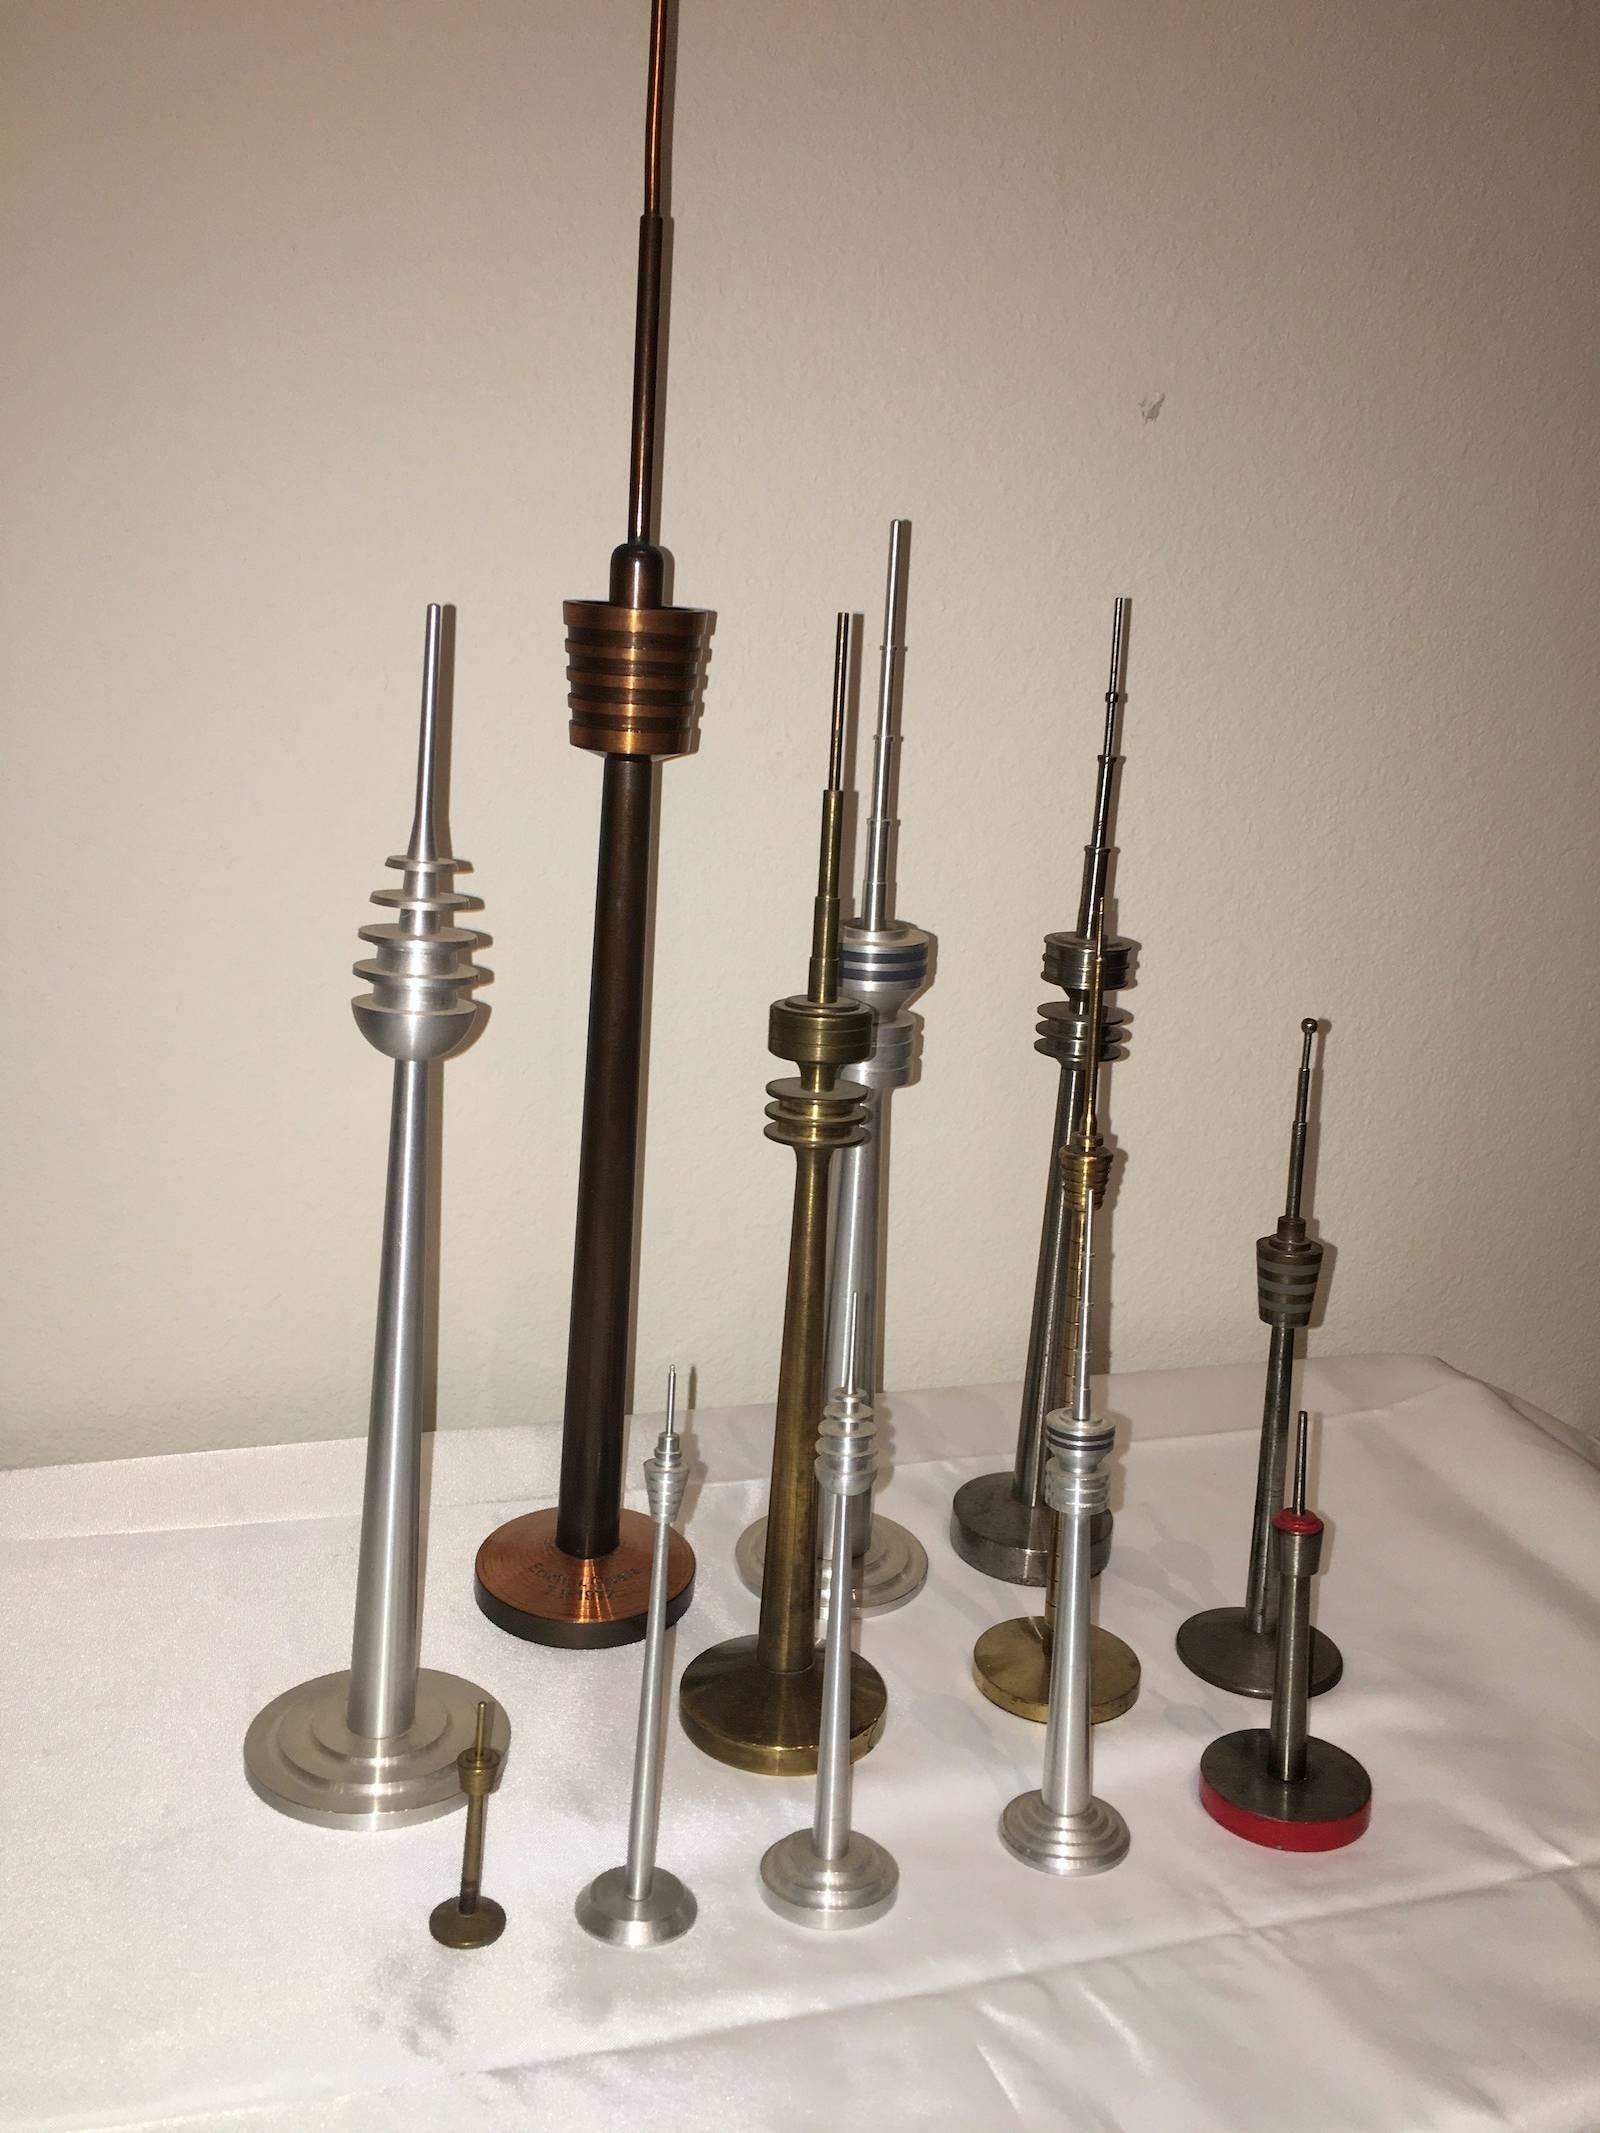 Metal Collection of TV Television Tower Models Design Statues German